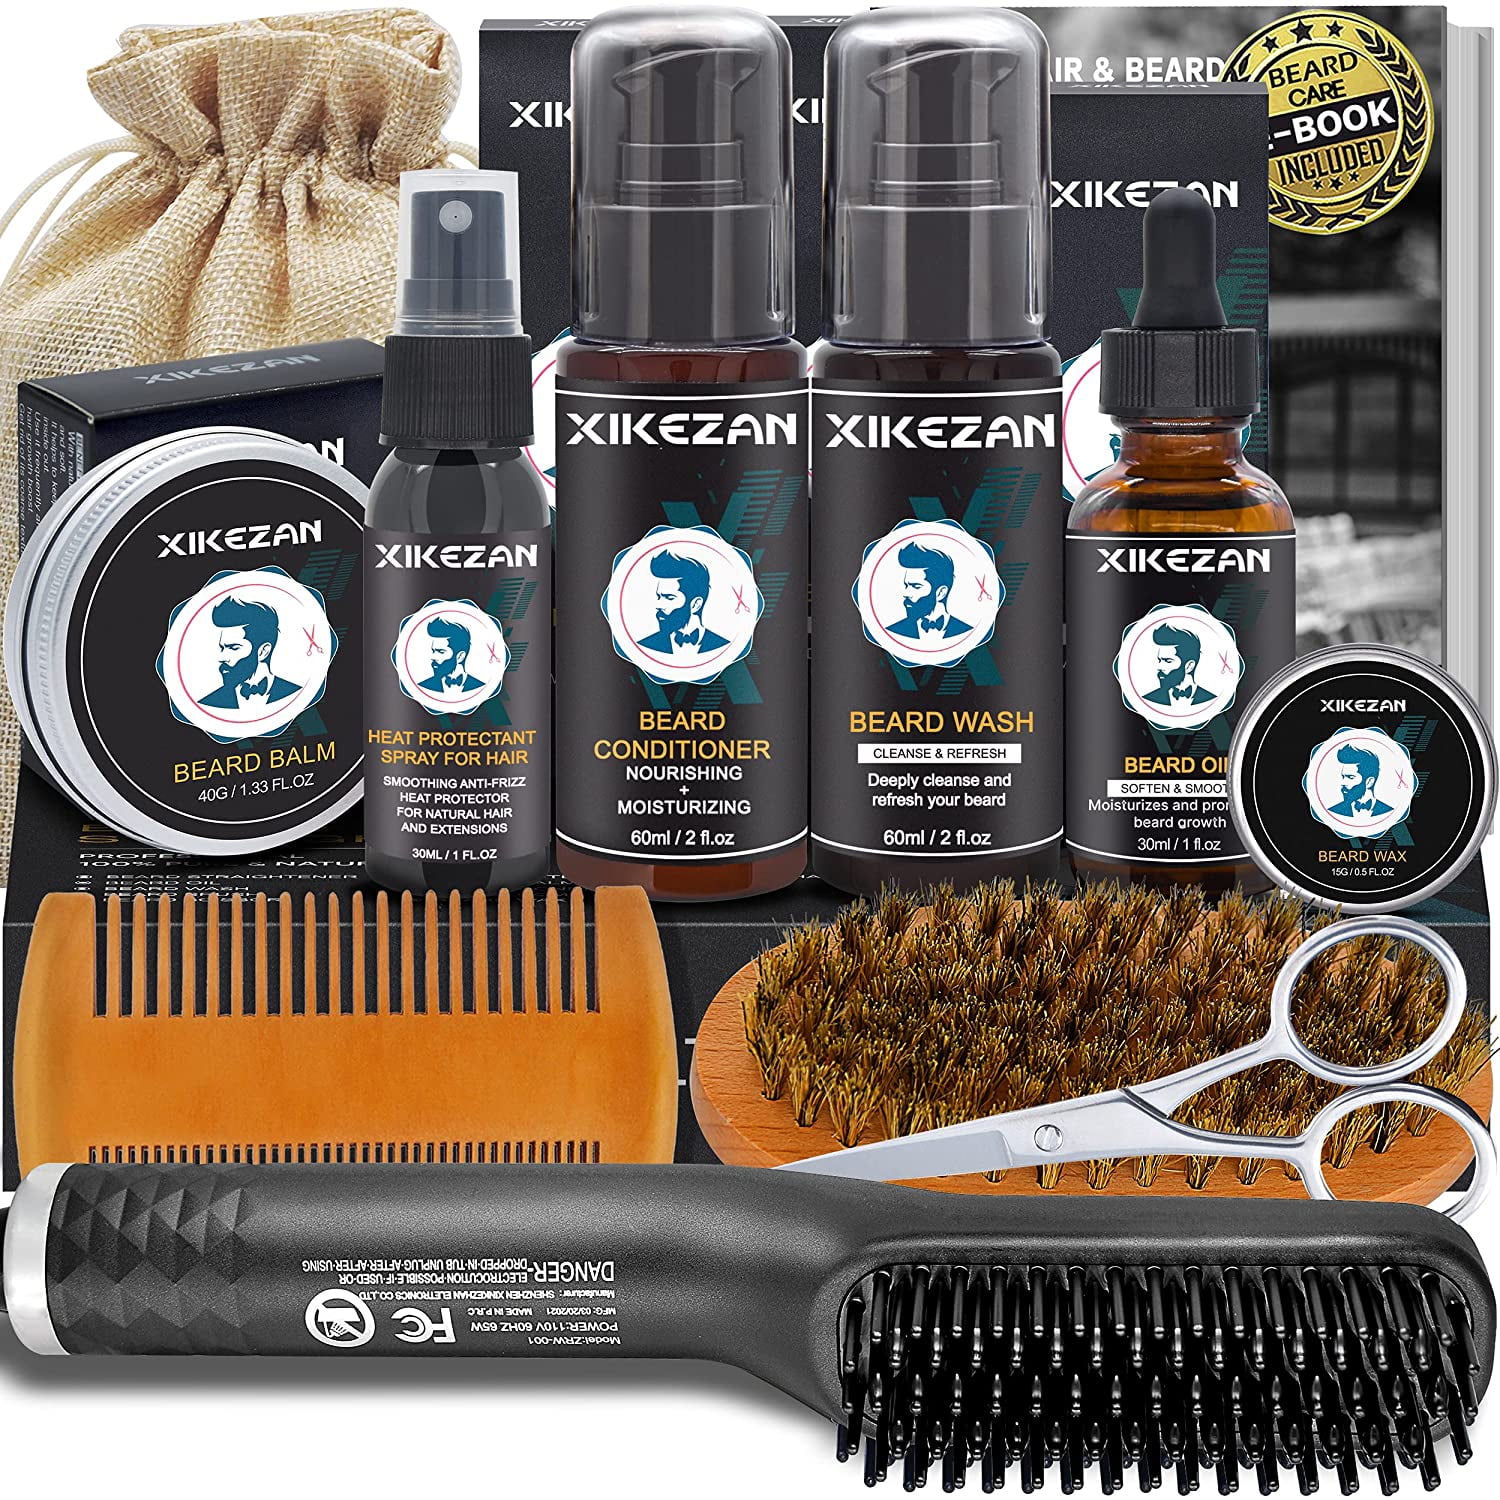 Beard Straightener,Beard Grooming Kit W/Heat Protectant Spray,Beard  Wash,Conditioner,Oil,Balm,Wax,Comb,Brush,Scissors,Unique Gifts for Men Dad